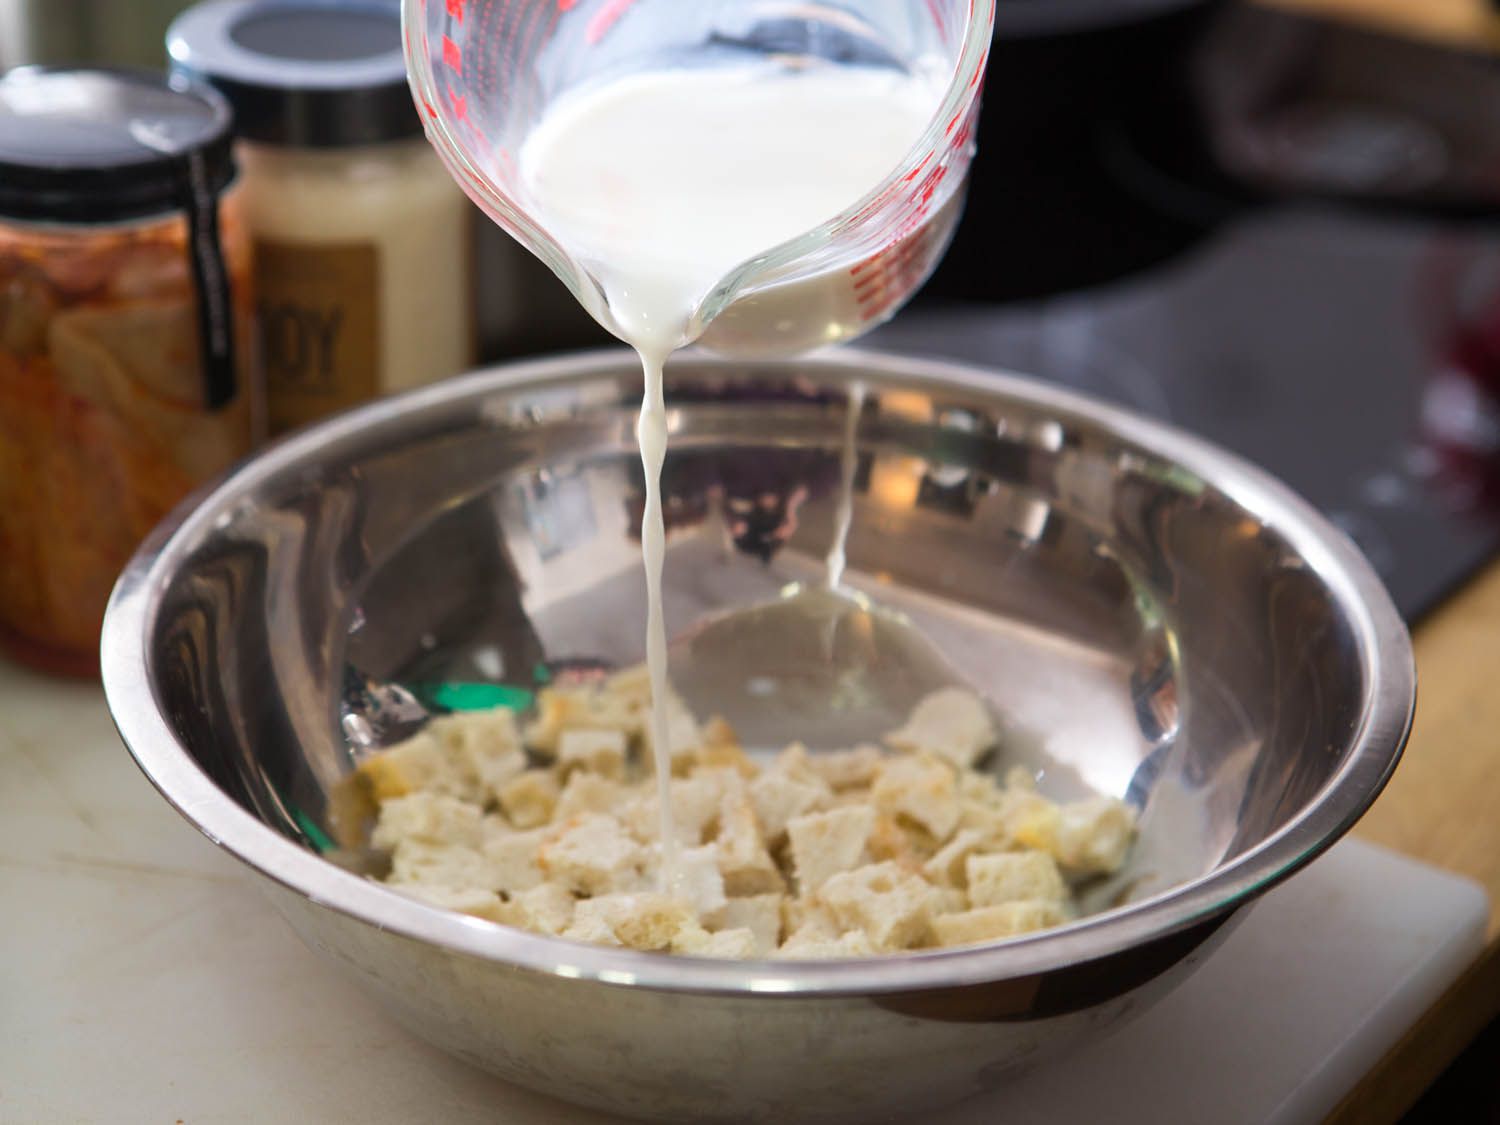 Pouring milk over bread cubes for making Swedish meatballs.